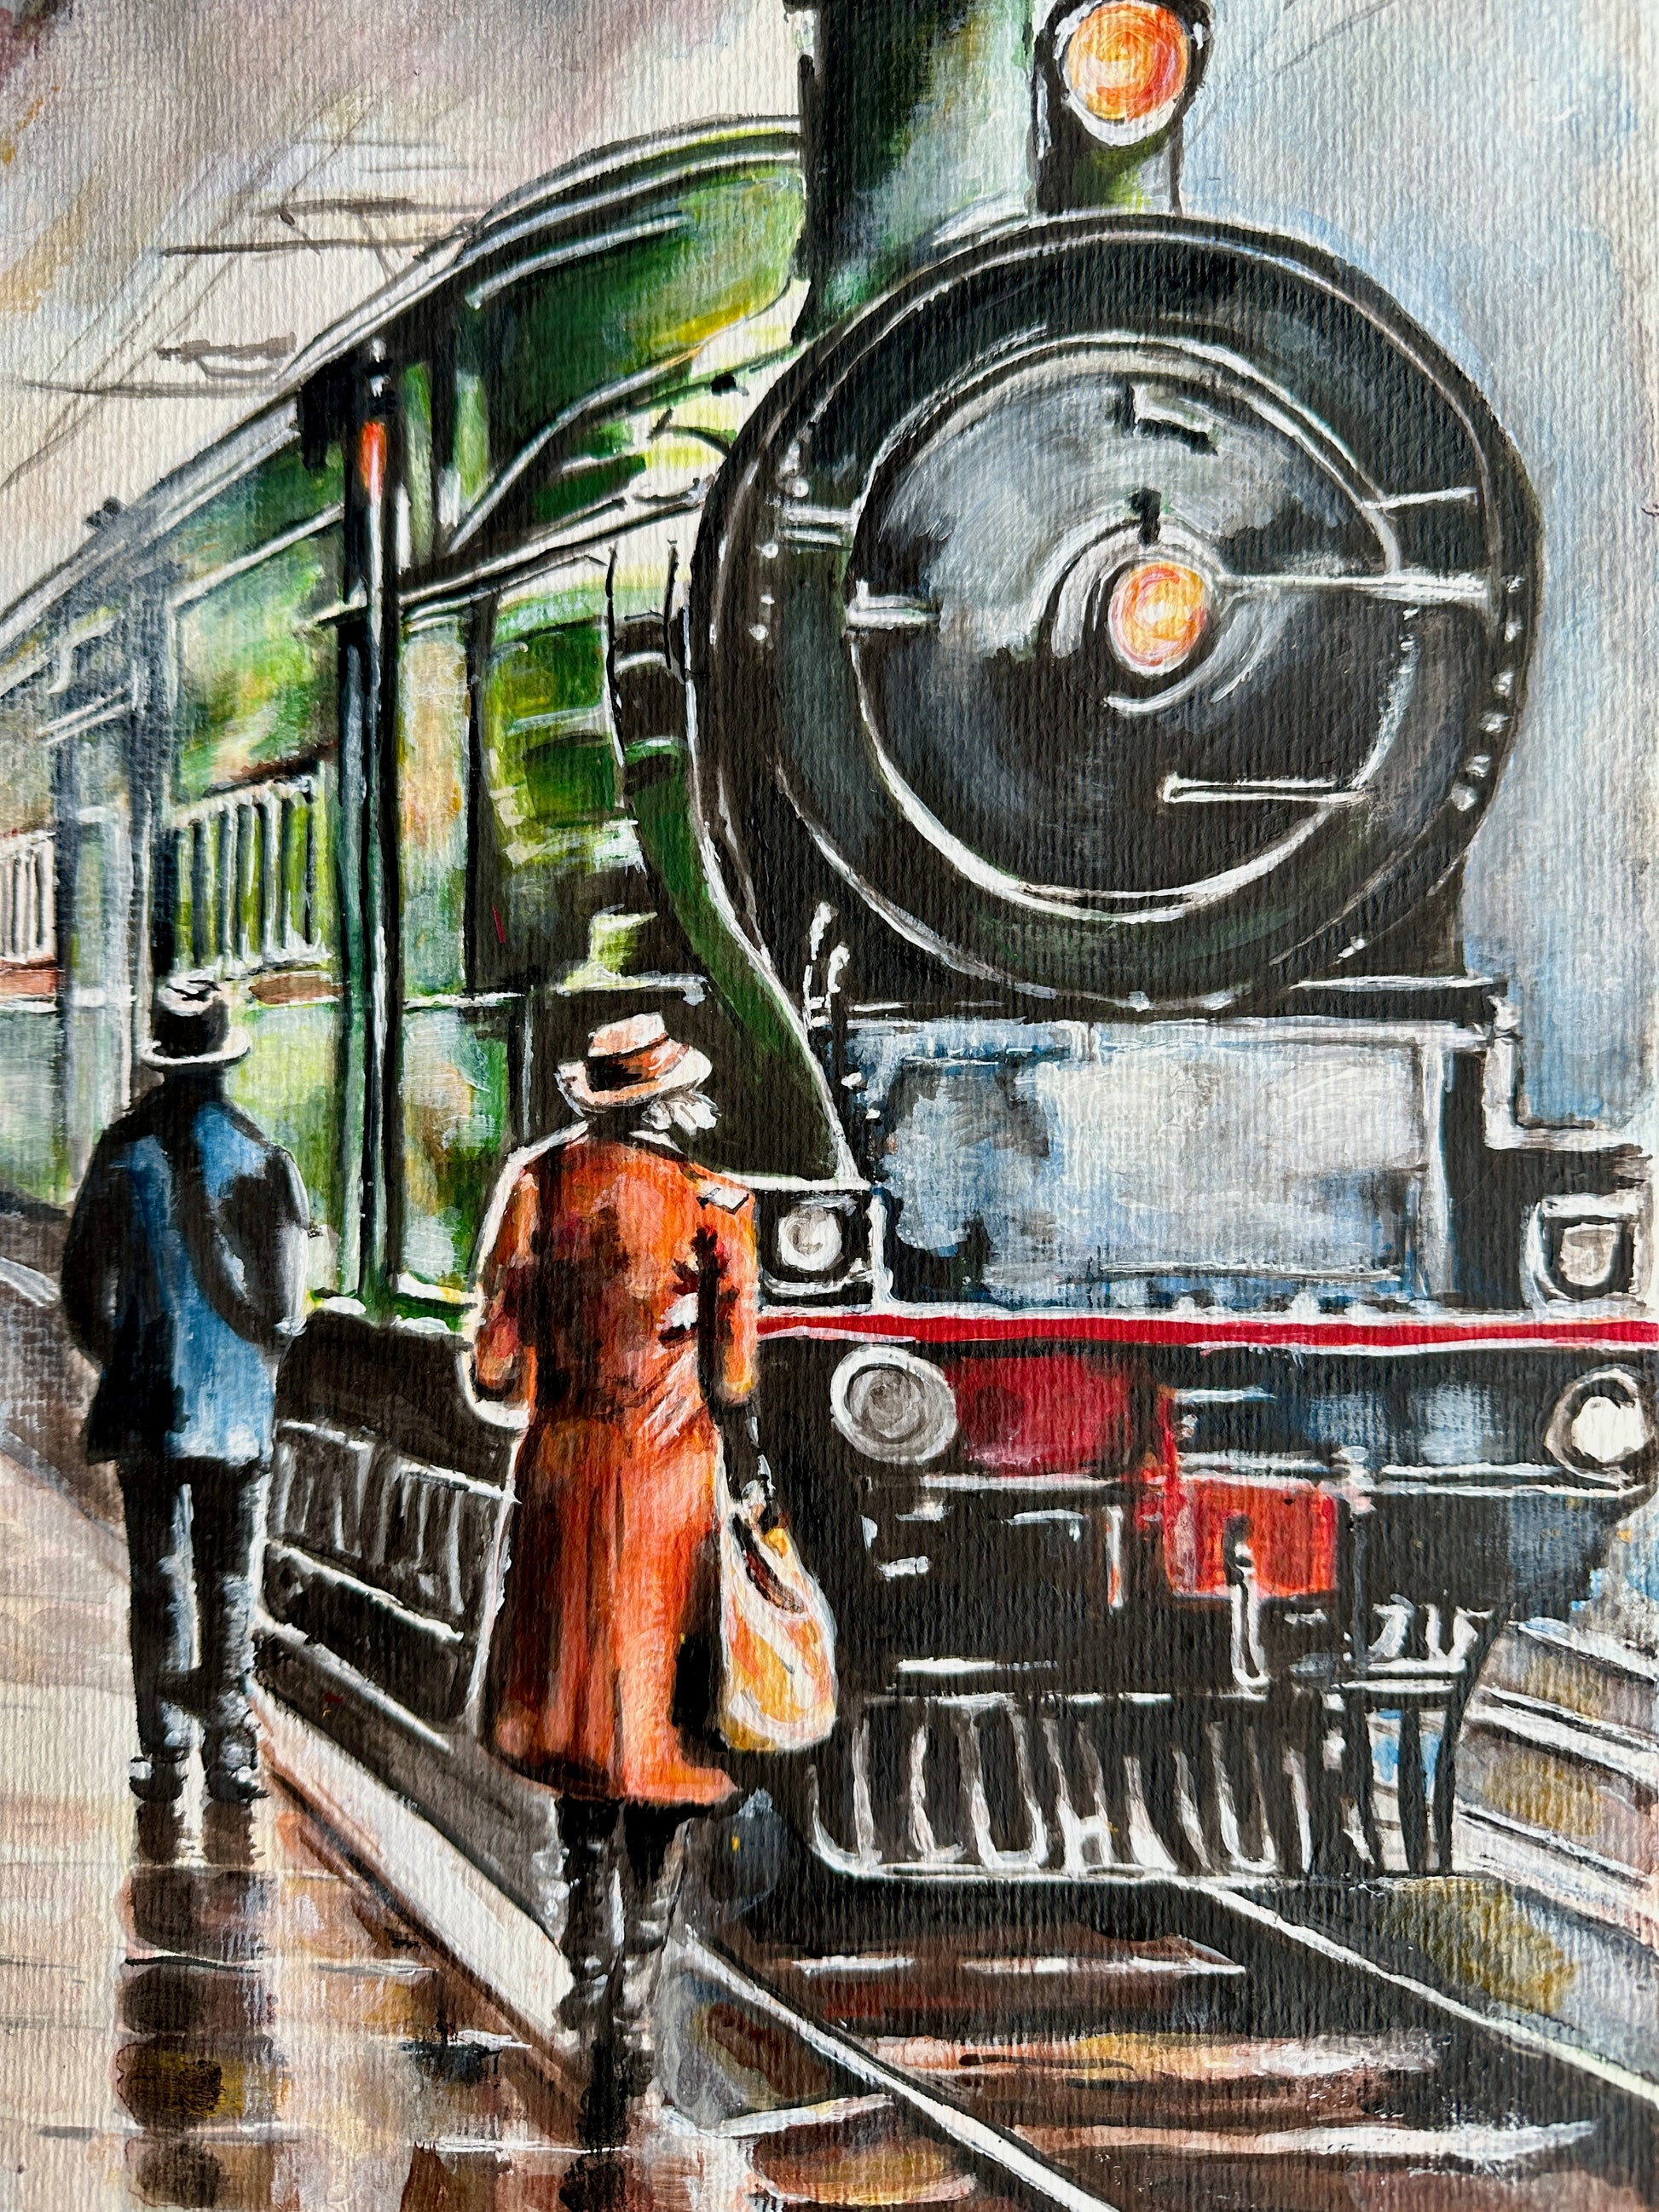 Step into the past with "Age of Steam," where the artist's masterful use of watercolour, acrylic paints, and ink brings the scene to life.